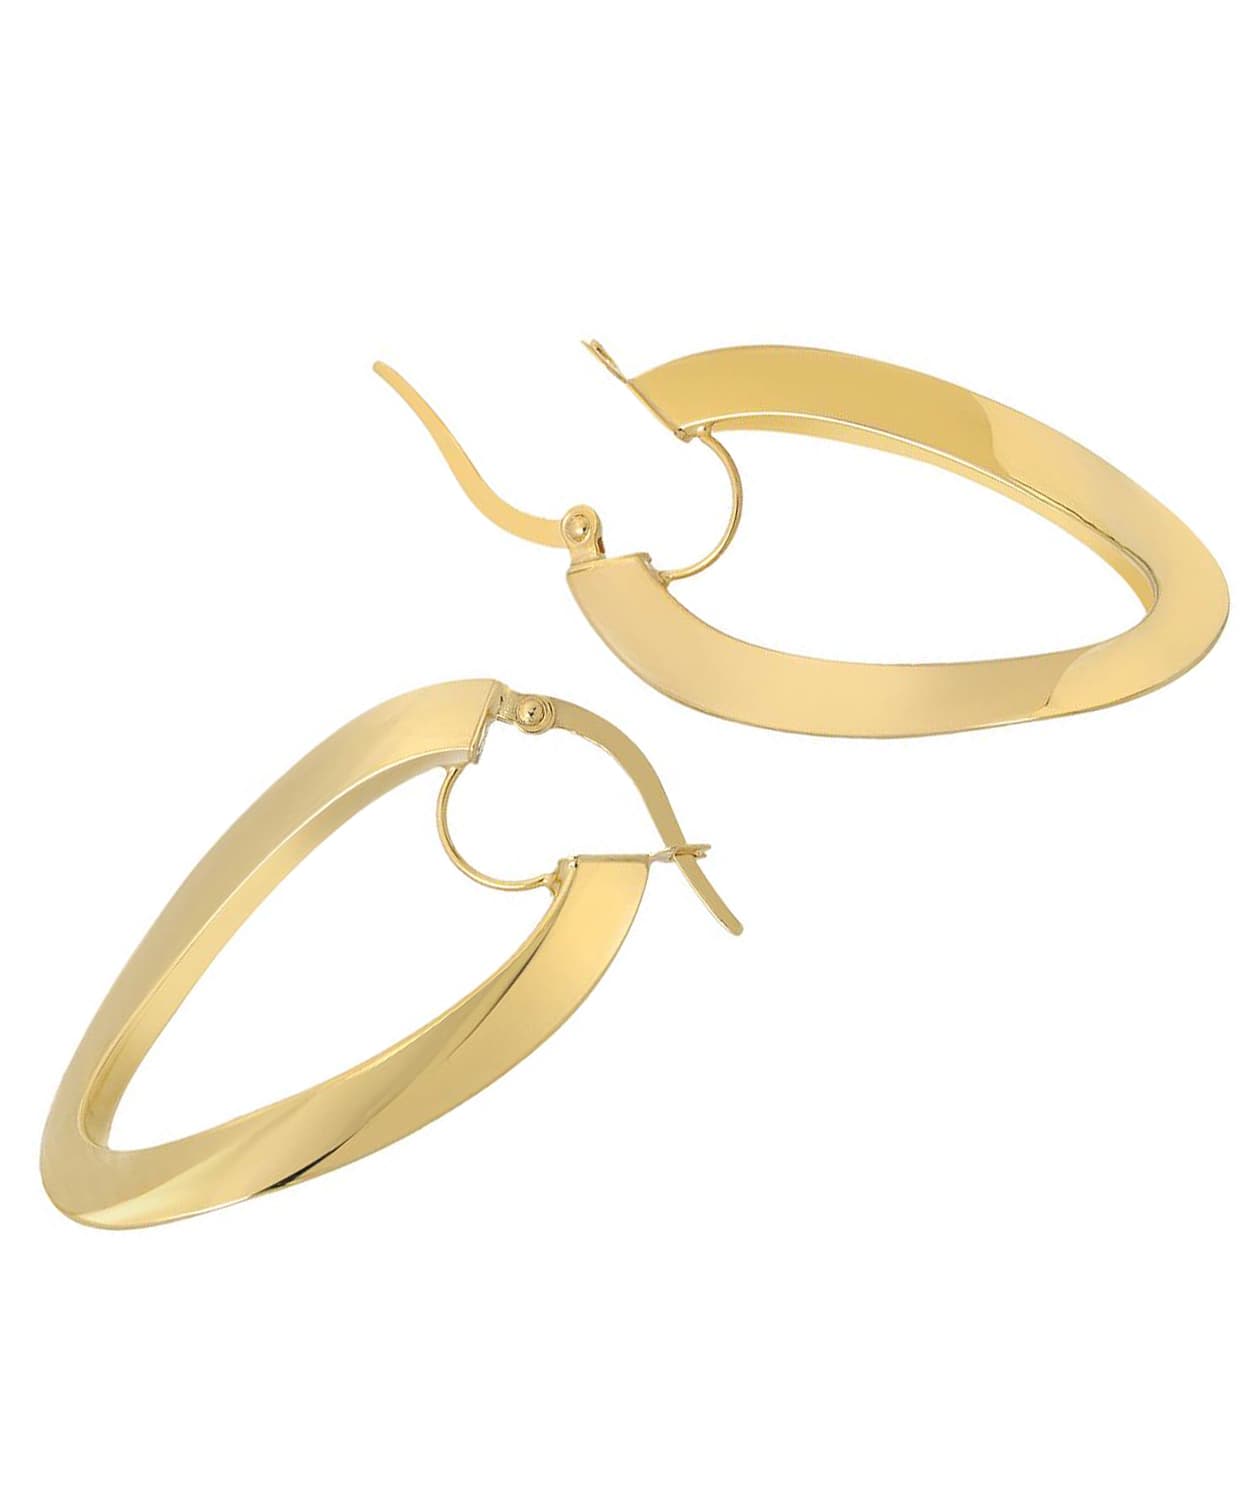 Esemco 10k Yellow Gold Contemporary Hoop Earrings View 2